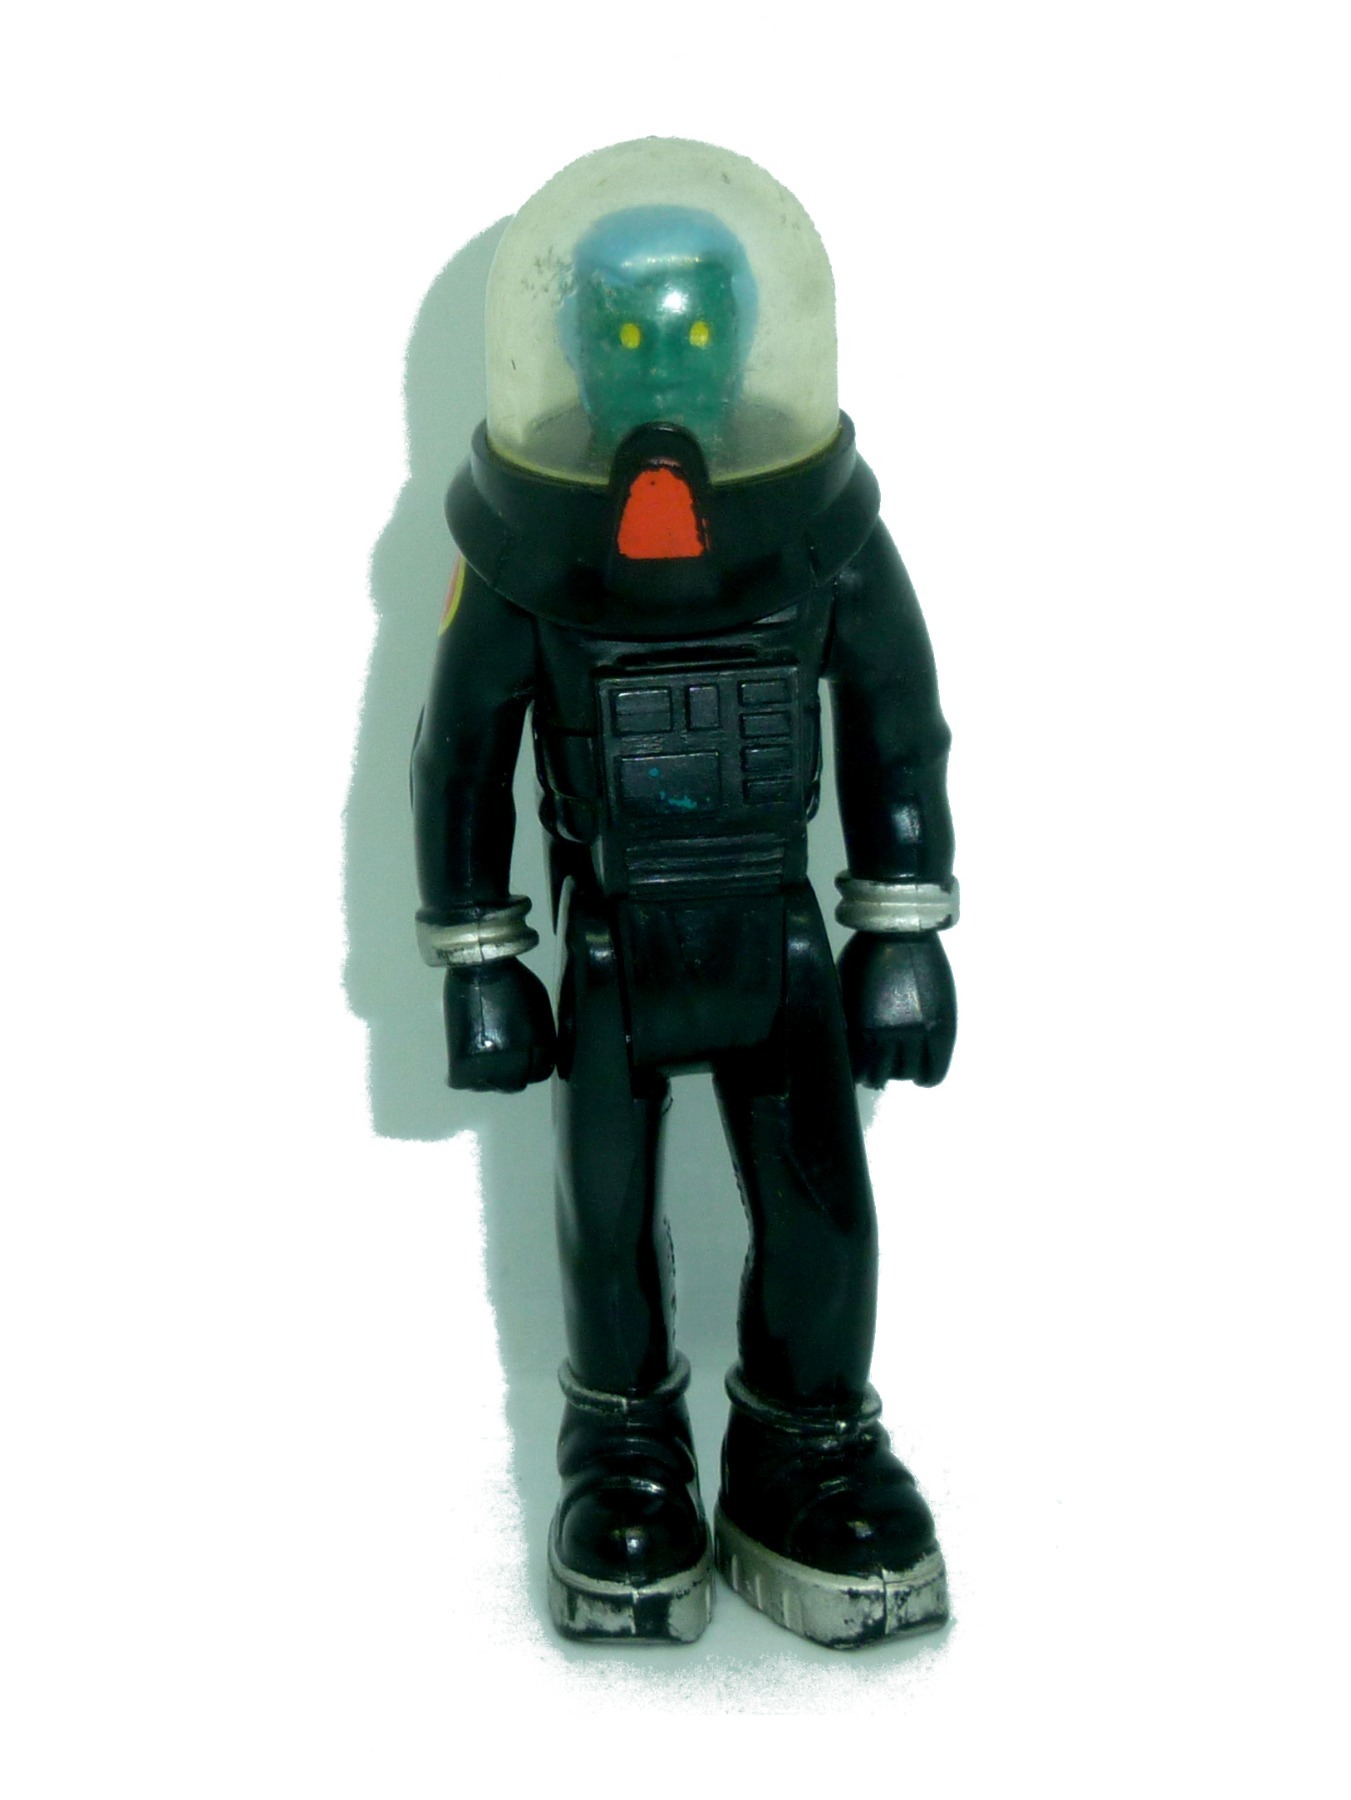 Astronaut / Space Figure 1979 Fisher Price Toys